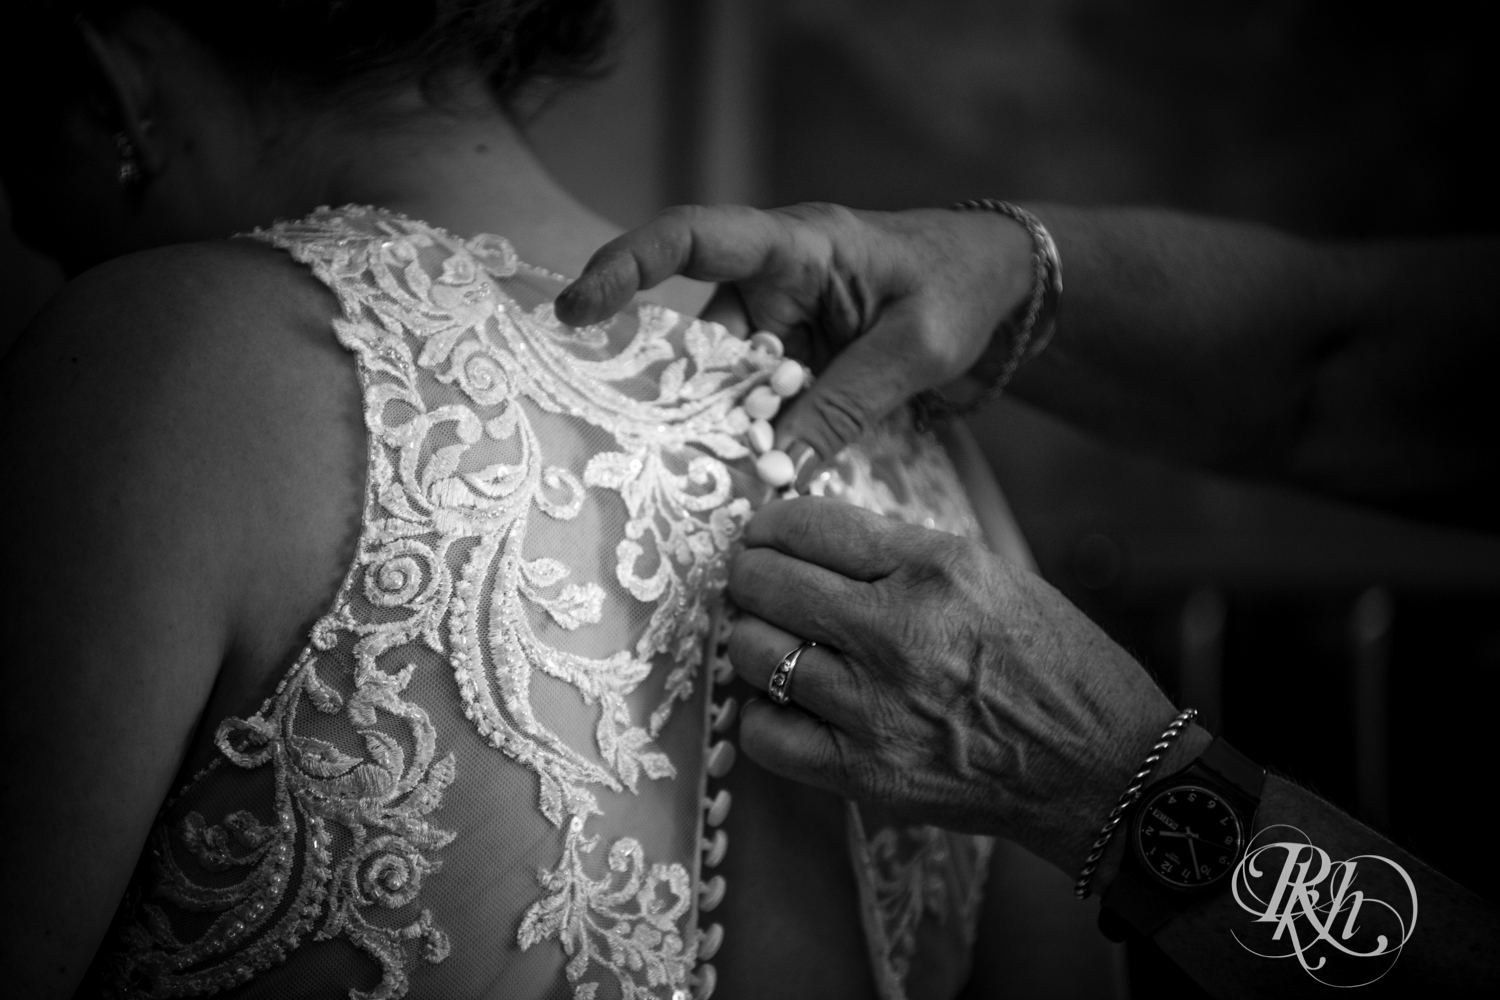 Bride getting buttoned into dress before wedding in Renaissance Hotel in Minneapolis, Minnesota. 